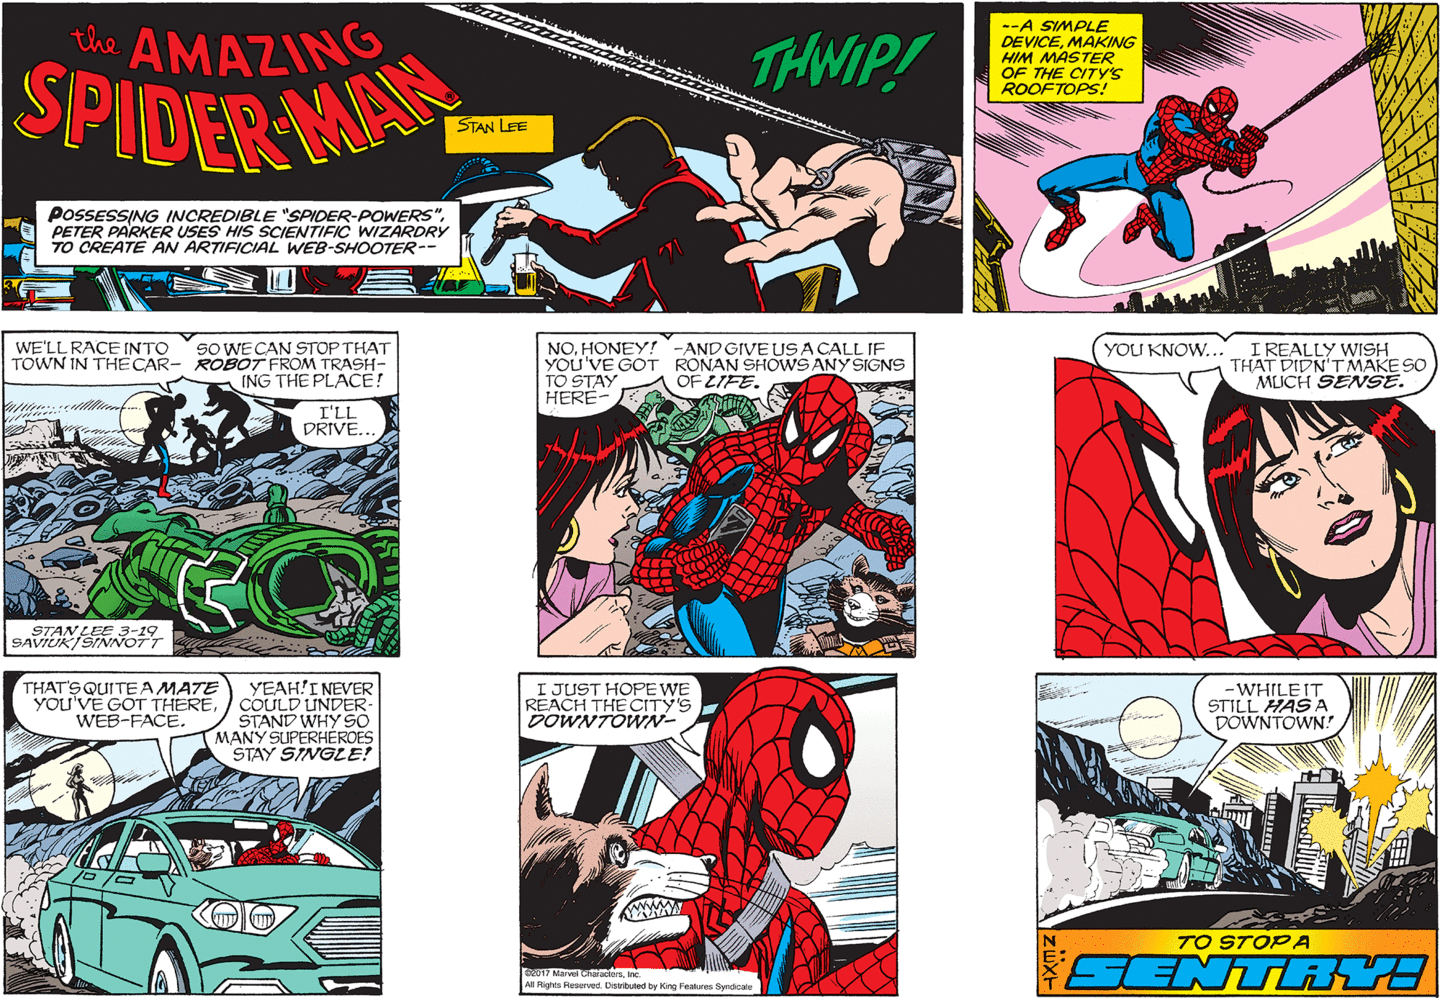 Spider-Man: 'We'll race to town in the car so that we can stop that ROBOT from trashing the place!' Mary Jane: 'I'll drive.' Spider-Man: 'No, honey --- you've got to stay here and give us a call if Ronan shows any signs of life.' Mary Jane: 'You know, I really wish that didn't make so much sense.' Rocket: 'That's quite a mate you've got there, web-face.' Spider-Man: 'Yeah! I never could understand why so many superheroes stay single. I just hope we reach the city's downtown while it still has a downtown!'